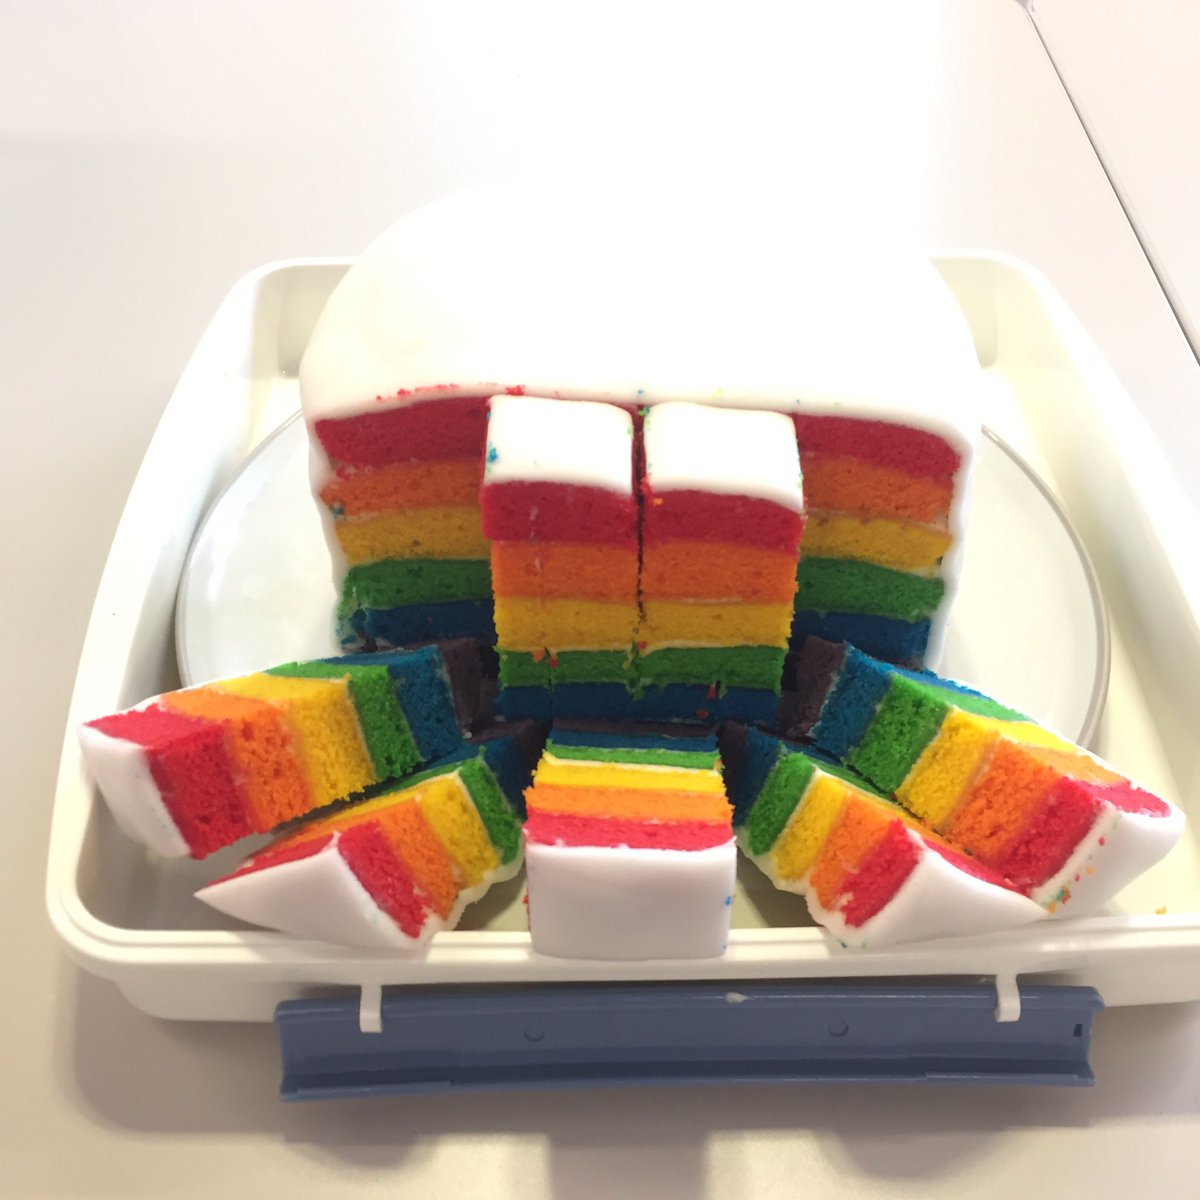 Good turnout for the @UoEStaffPride coffee and cake today at the western. Pretty pleased with my cake creation #LGBTHistoryMonth #LGBTHM19 #pridecake #rainbow